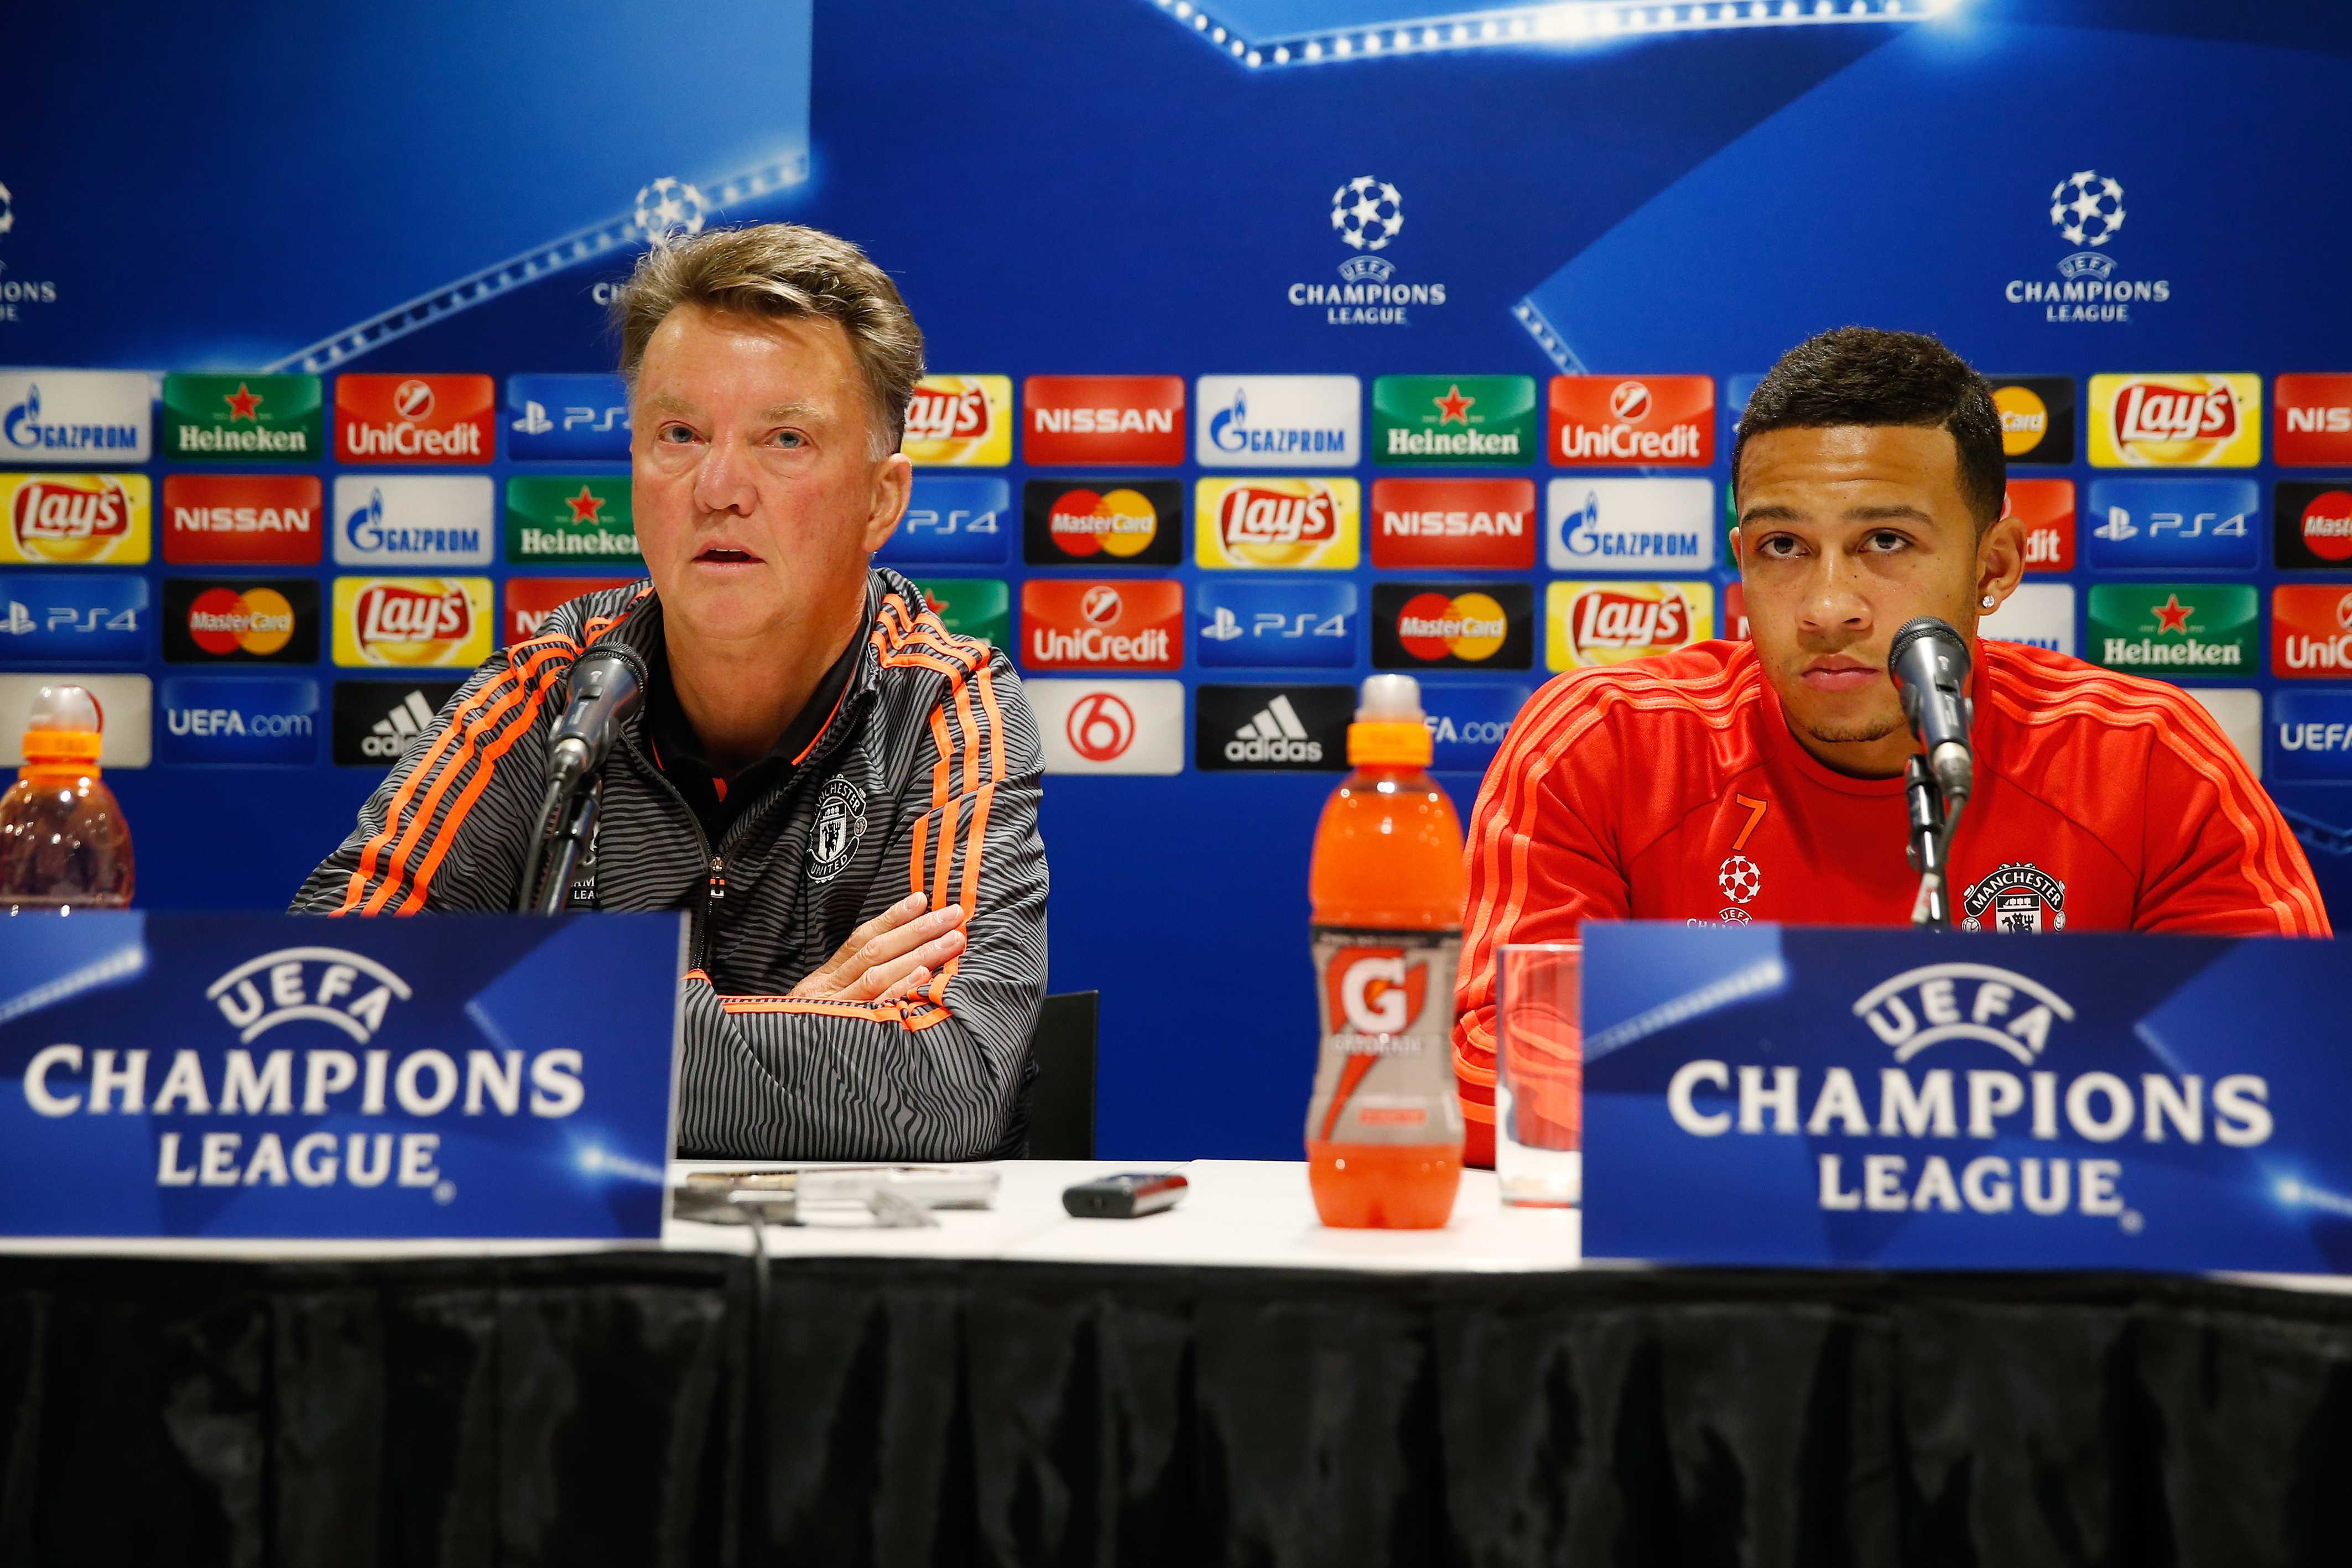 epa04930467 Manchester United manager Louis van Gaal (L) and player Memphis attend a press conference in Eindhoven, The Netherlands, 14 September 2015. Manchester United will face PSV Eindhoven in a UEFA Champions League Group B match in Eindhoven on 15 September.  EPA/Bas Czerwinski